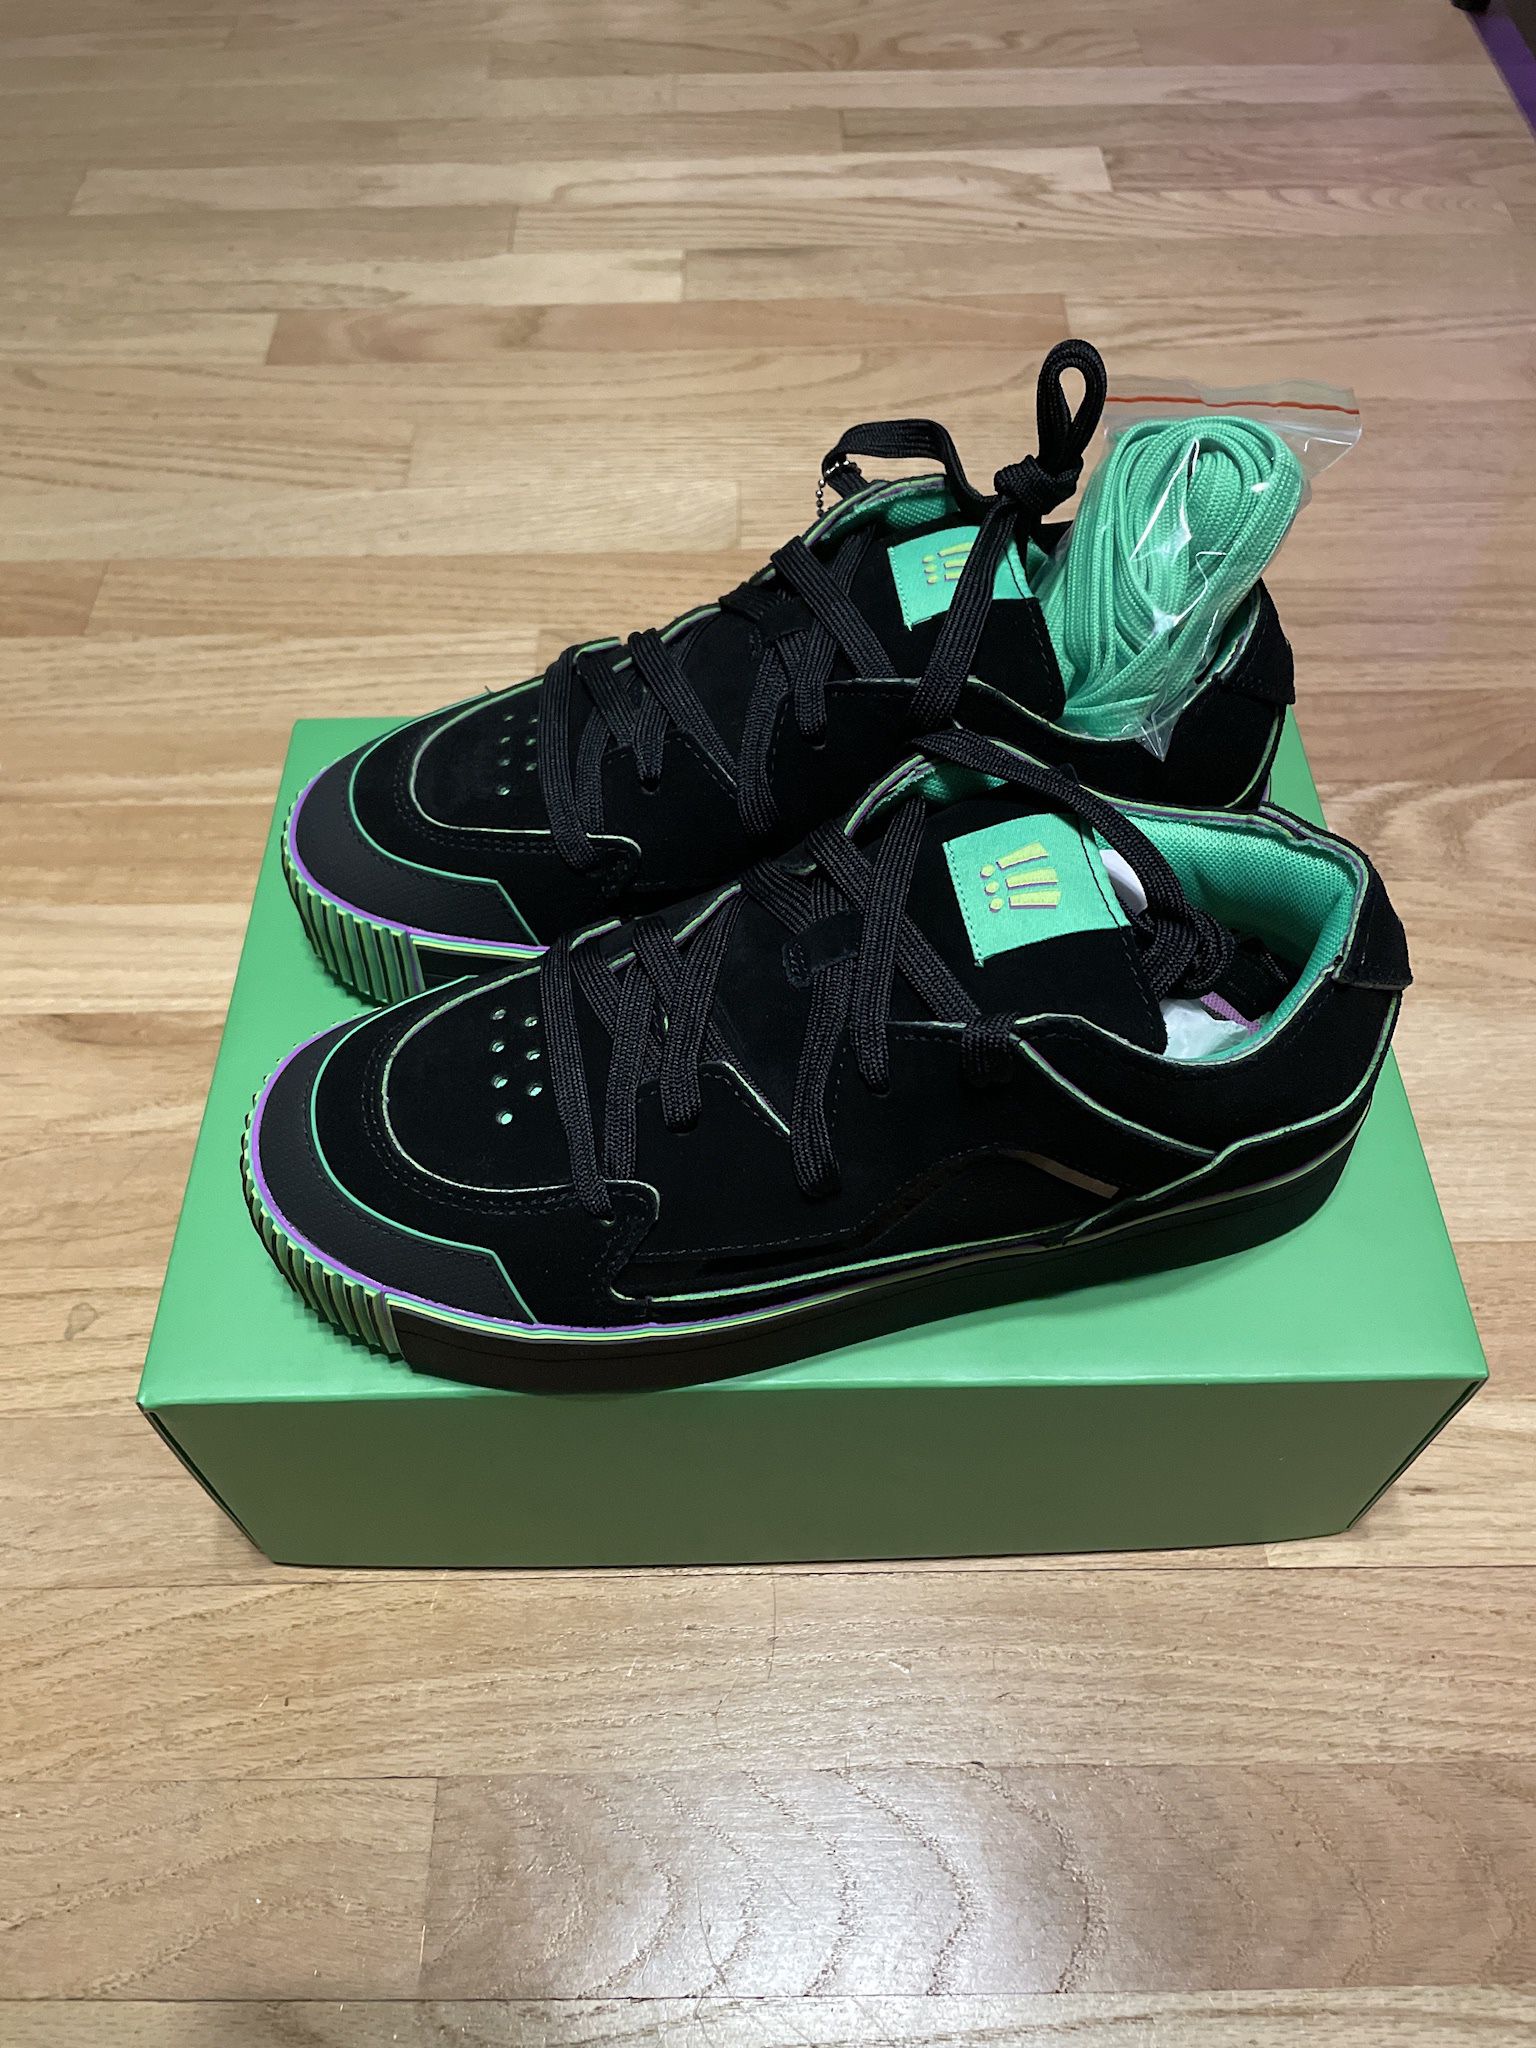 Mschf Gobstompers Sour Edition for Sale in Naperville, IL - OfferUp